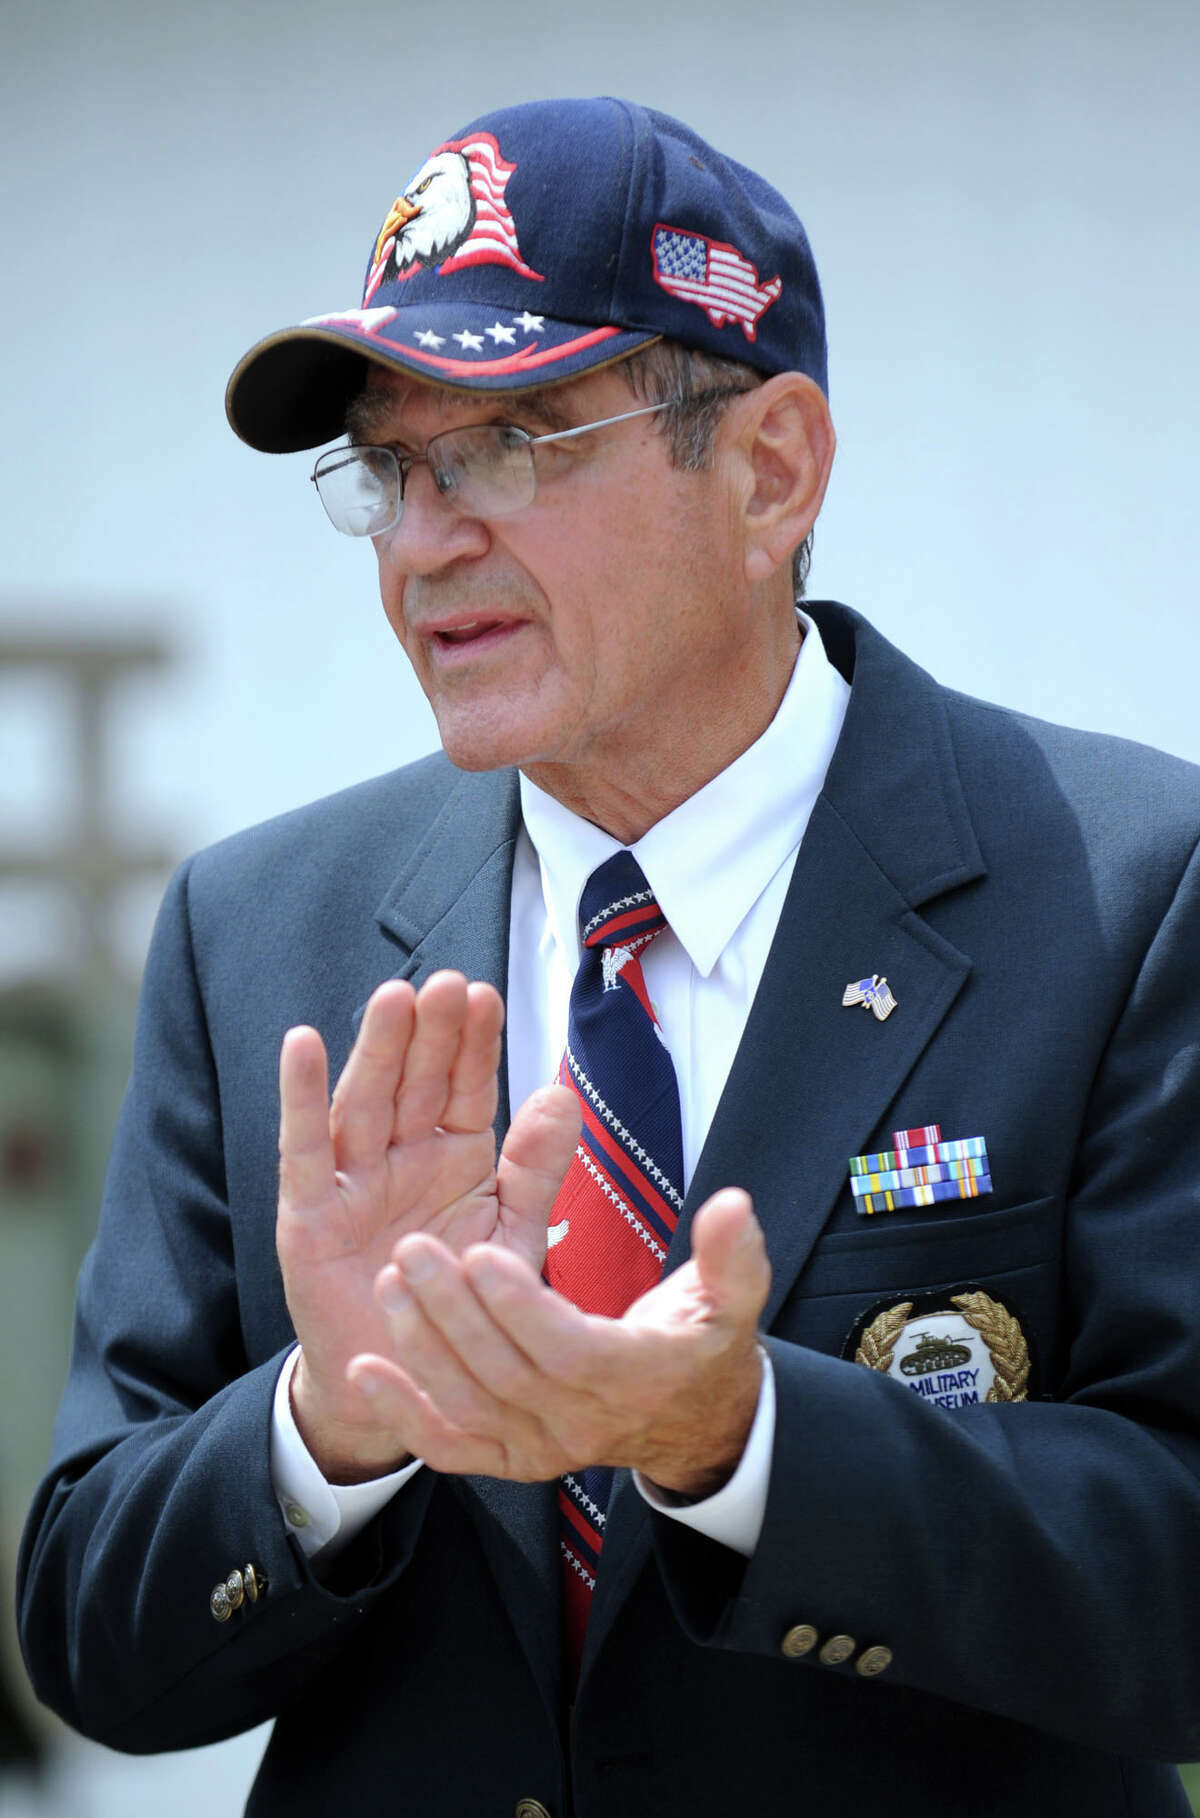 John Valluzzo, of Ridgefield, founder and president of the Southern New England Military Museum in Danbury, applauds speakers at a ceremony that brought pieces of steel from the World Trade Center to the museum's display. Photo taken Tuesday, June 28, 2011.